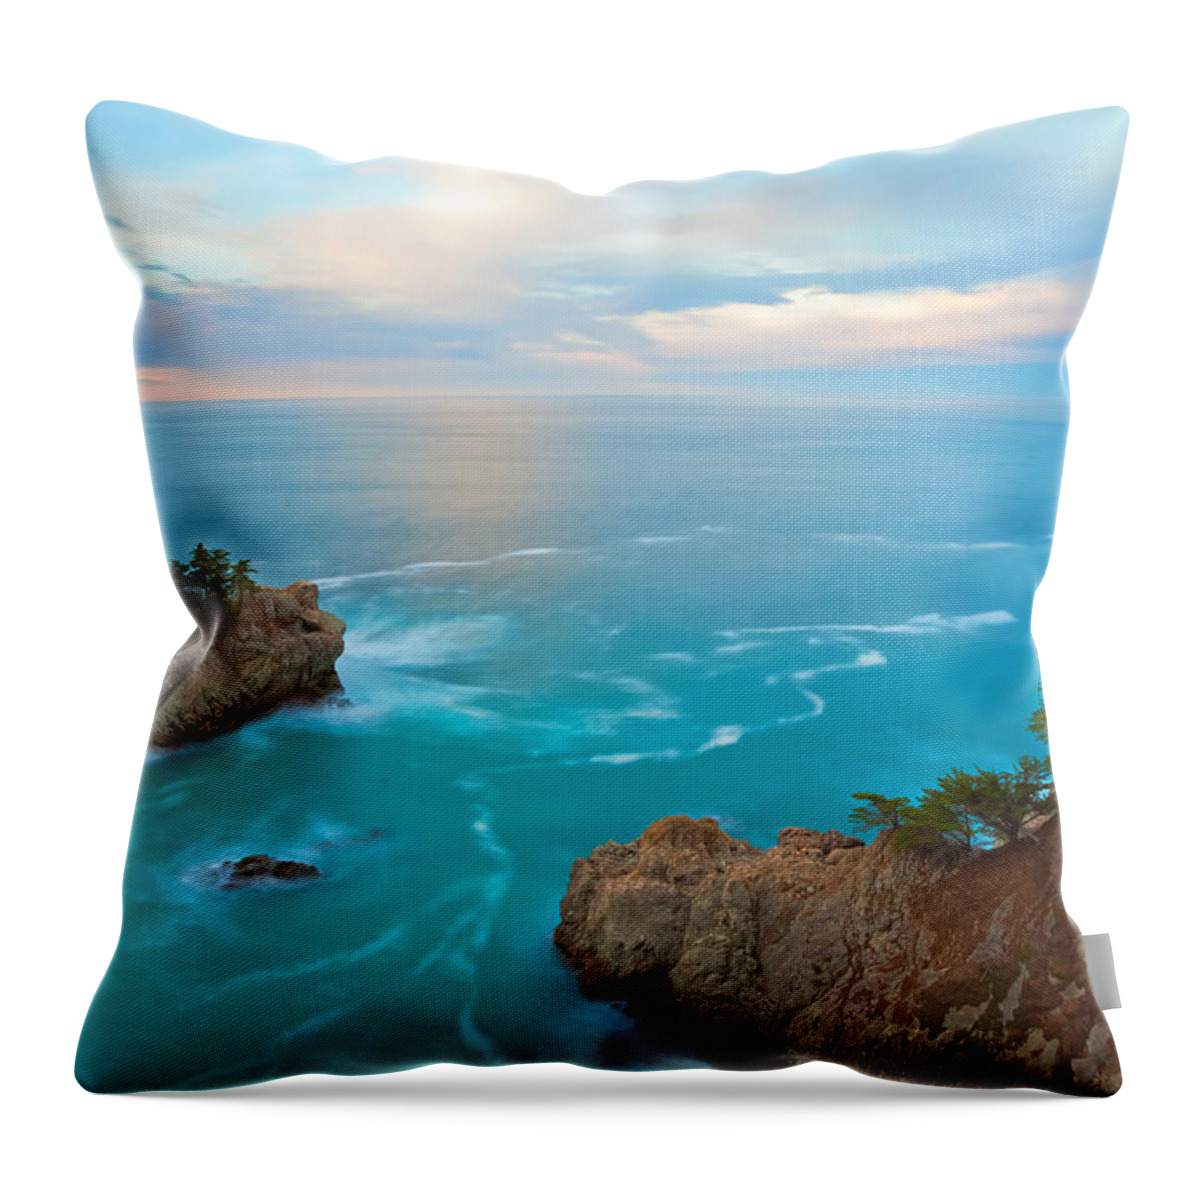 Landscape Throw Pillow featuring the photograph Paradise by Jonathan Nguyen